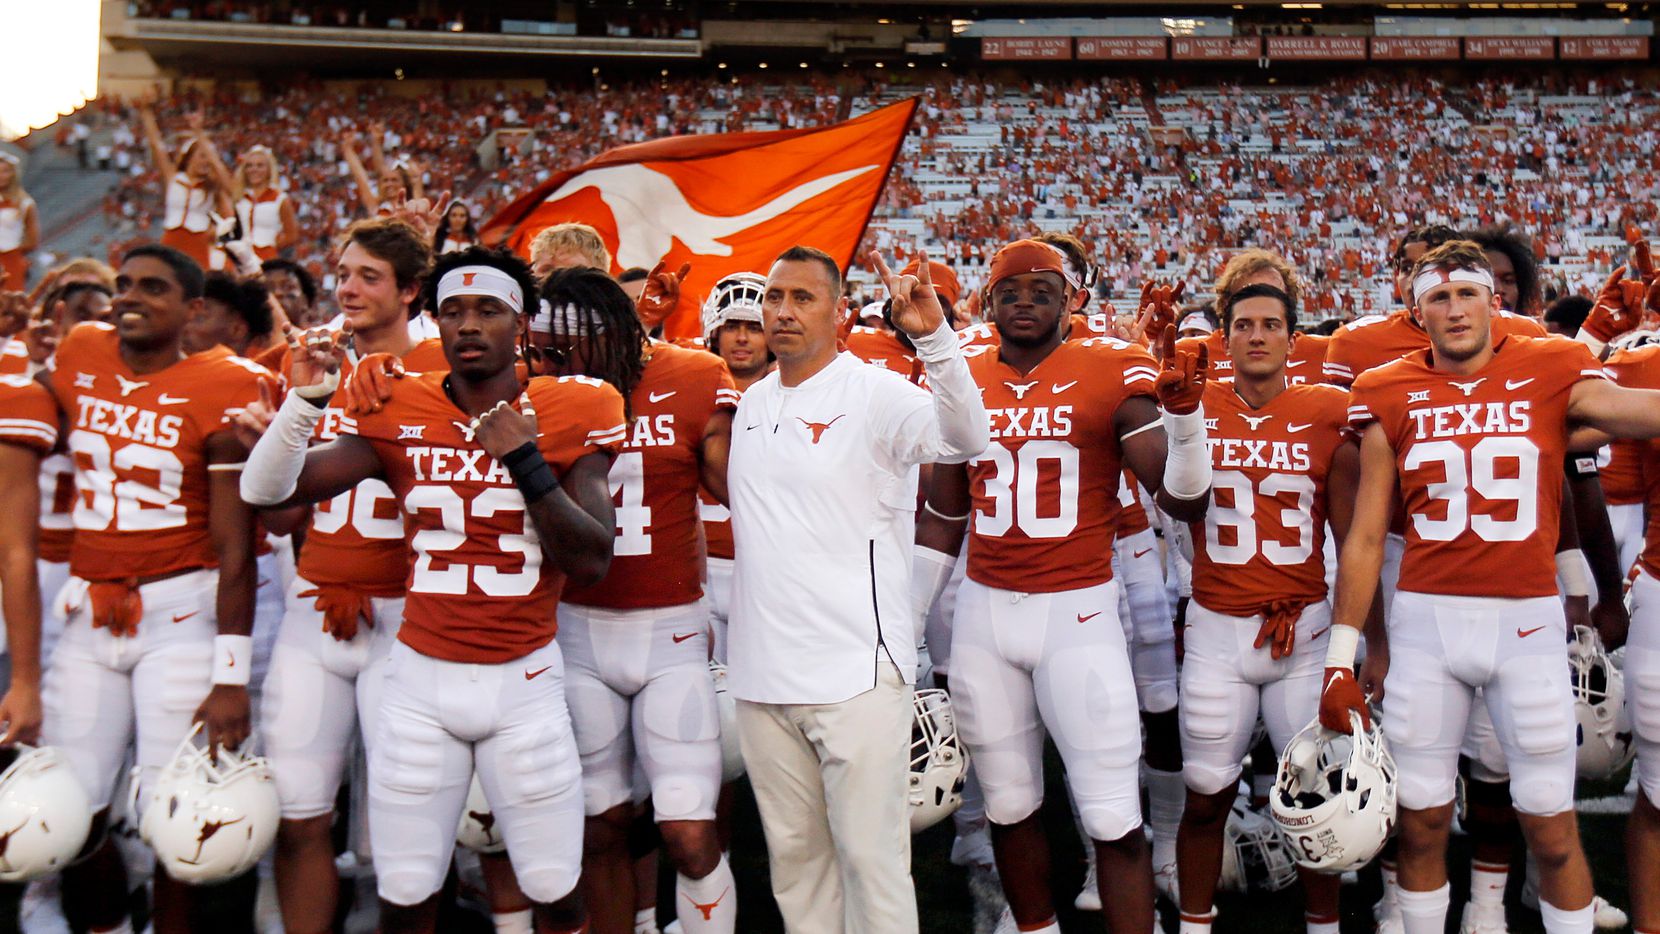 Texas Longhorns head coach Steve Sarkisian (center) and his players sing 'The Eyes of Texas' following their win over the Louisiana-Lafayette Ragin Cajuns at DKR-Texas Memorial Stadium in Austin, Saturday, September 4, 2021.